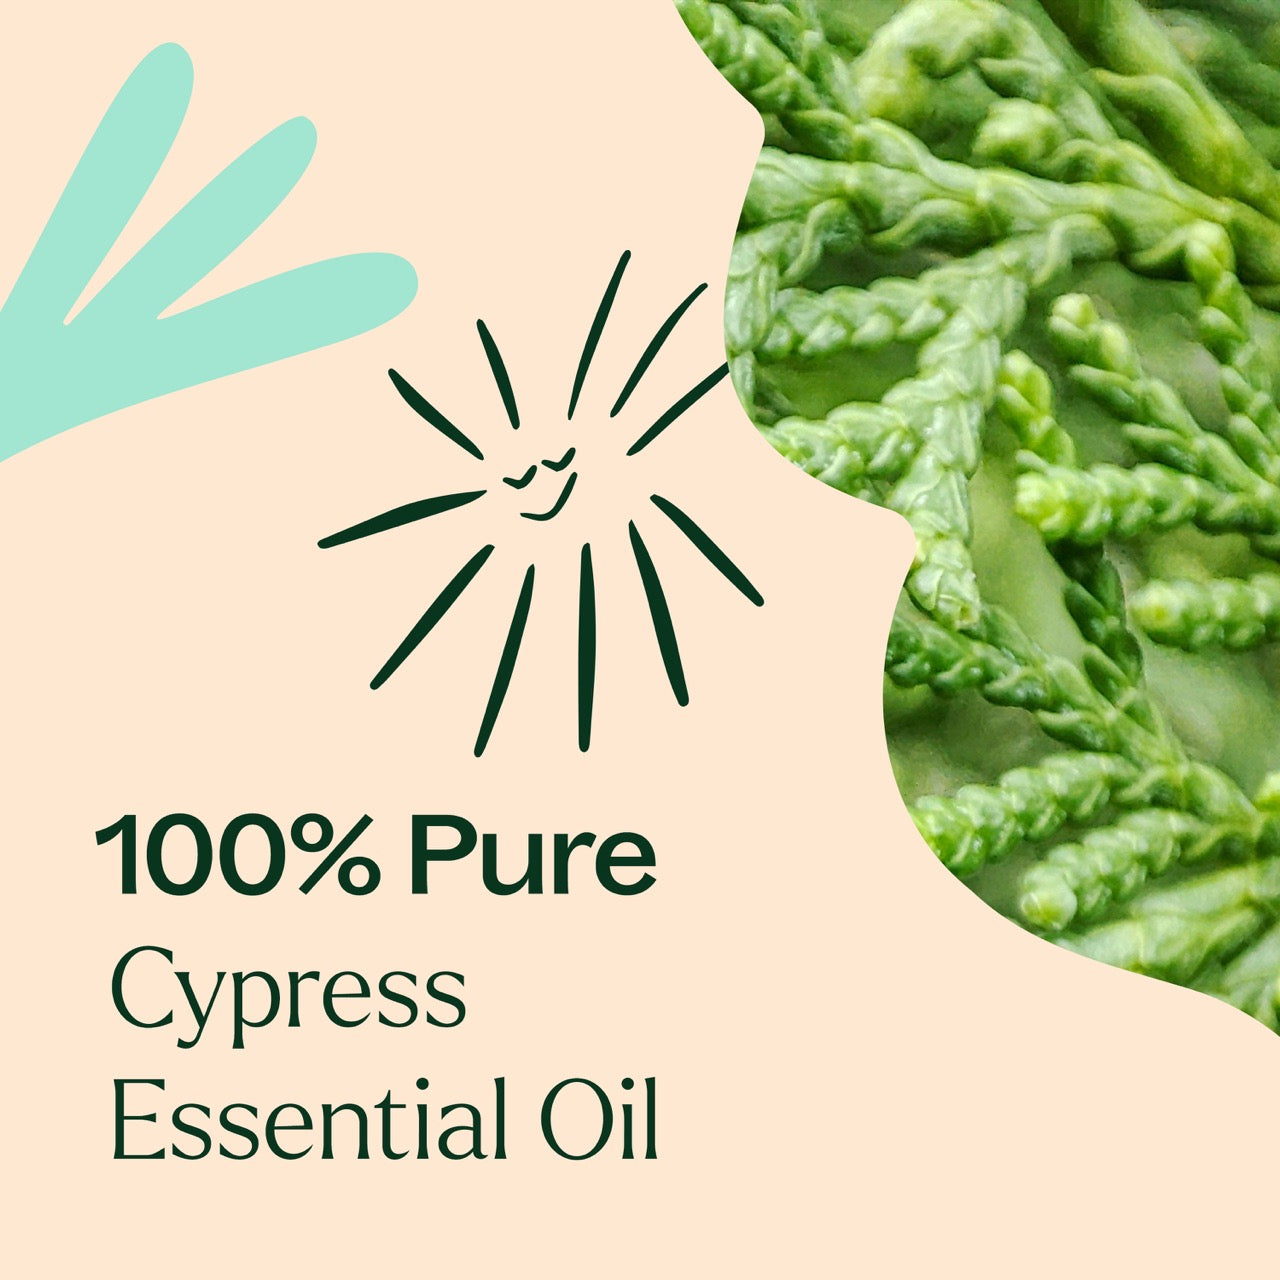 100% pure Cypress Essential Oil